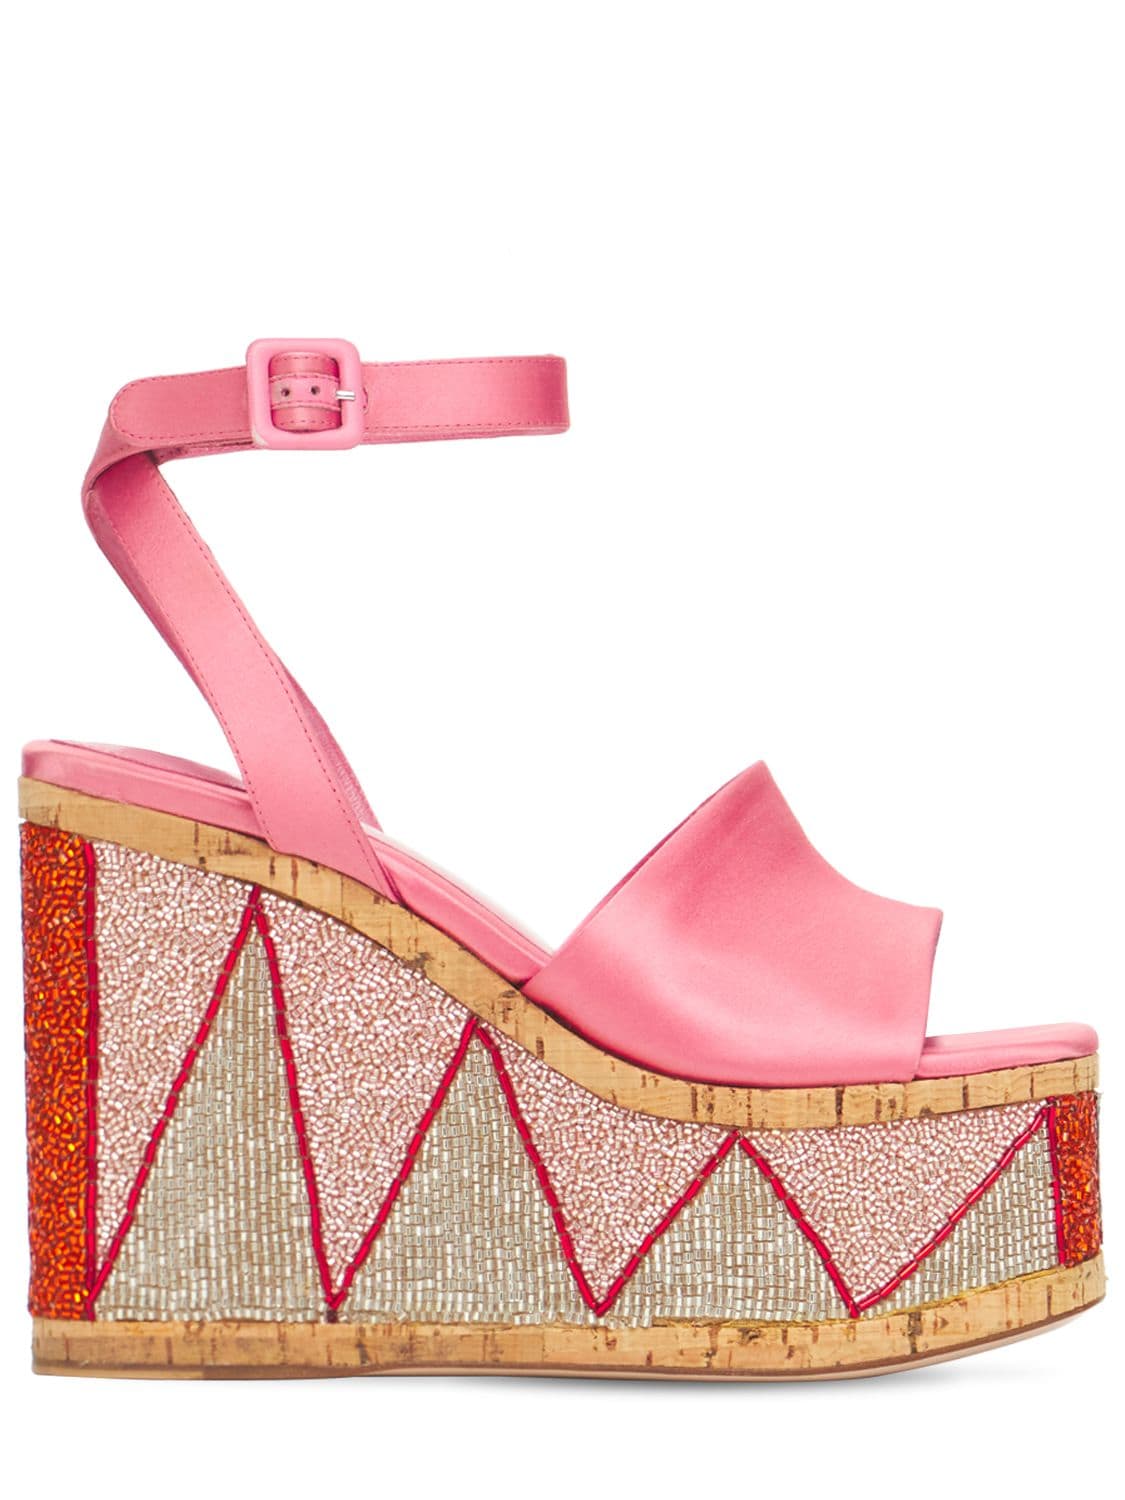 HAUS OF HONEY 125MM LUST BEAD EMBELLISHED SATIN WEDGES,74IYBD003-UEVUQUW1